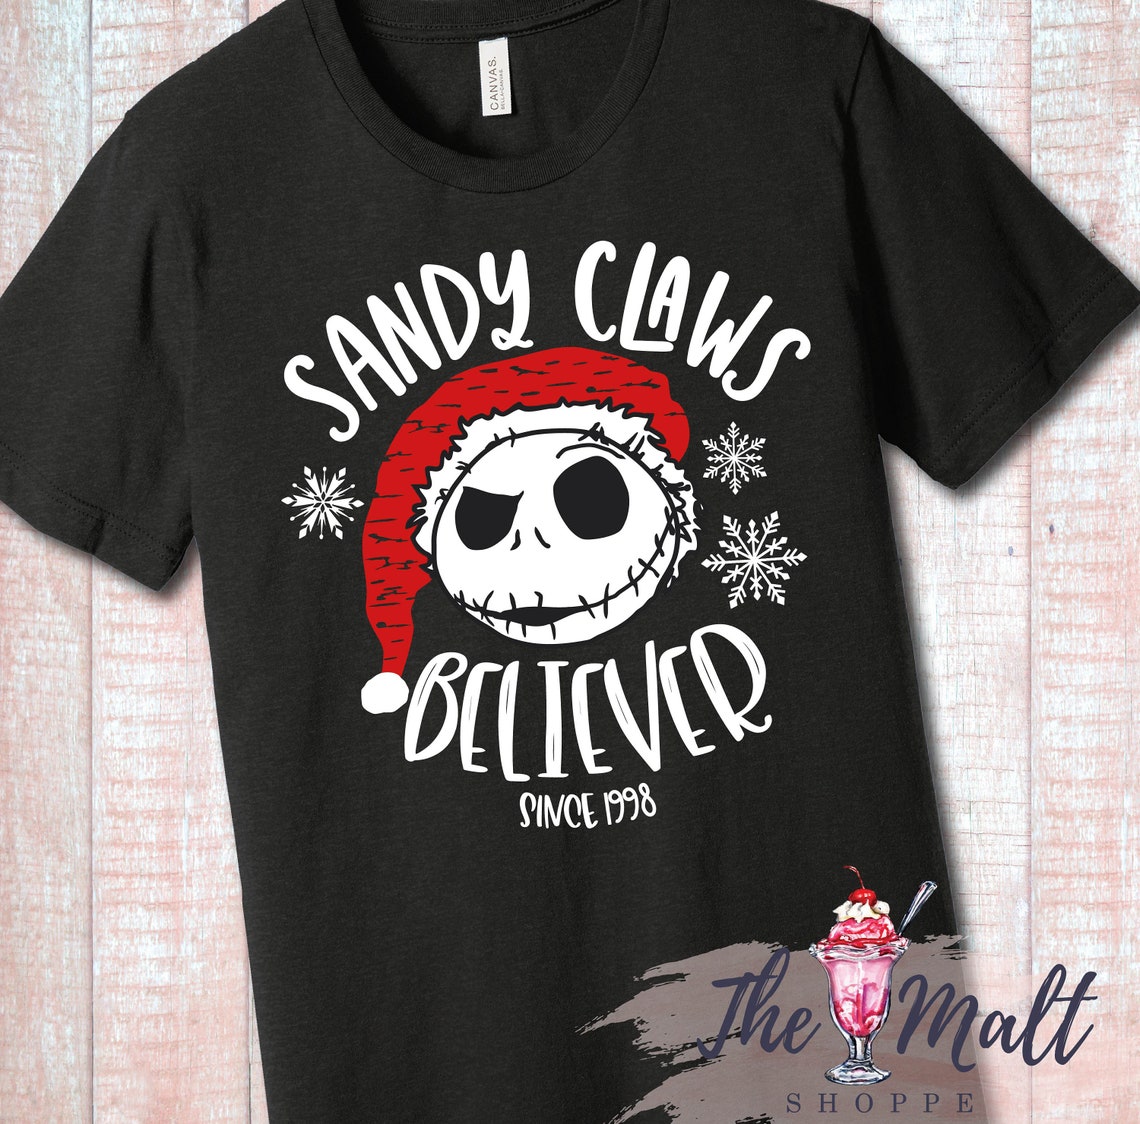 Sandy Claws Believer Inspired by Nightmare Before Christmas